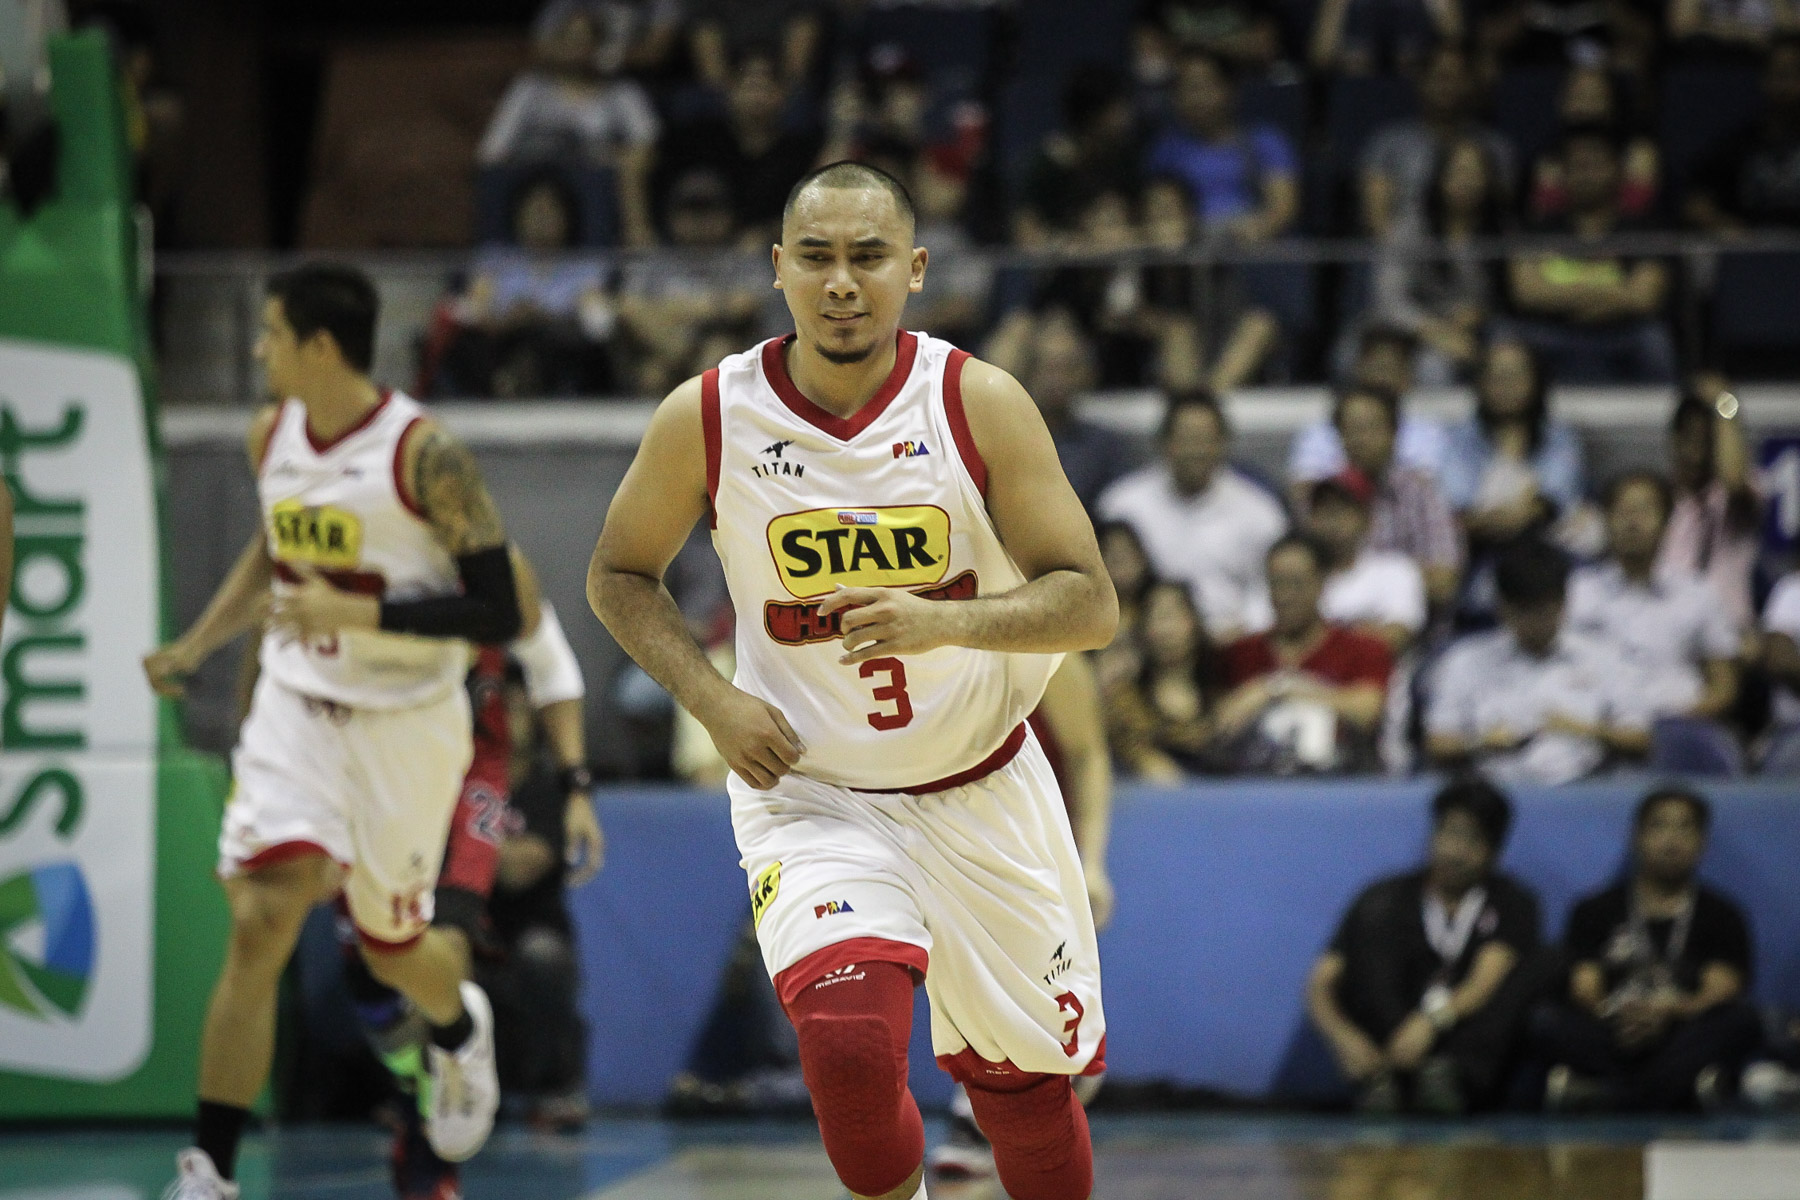 STRUGGLE. Paul Lee struggles with 9 turnovers in his first game as a Star Hotshot. Photo by Josh Albelda/Rappler 